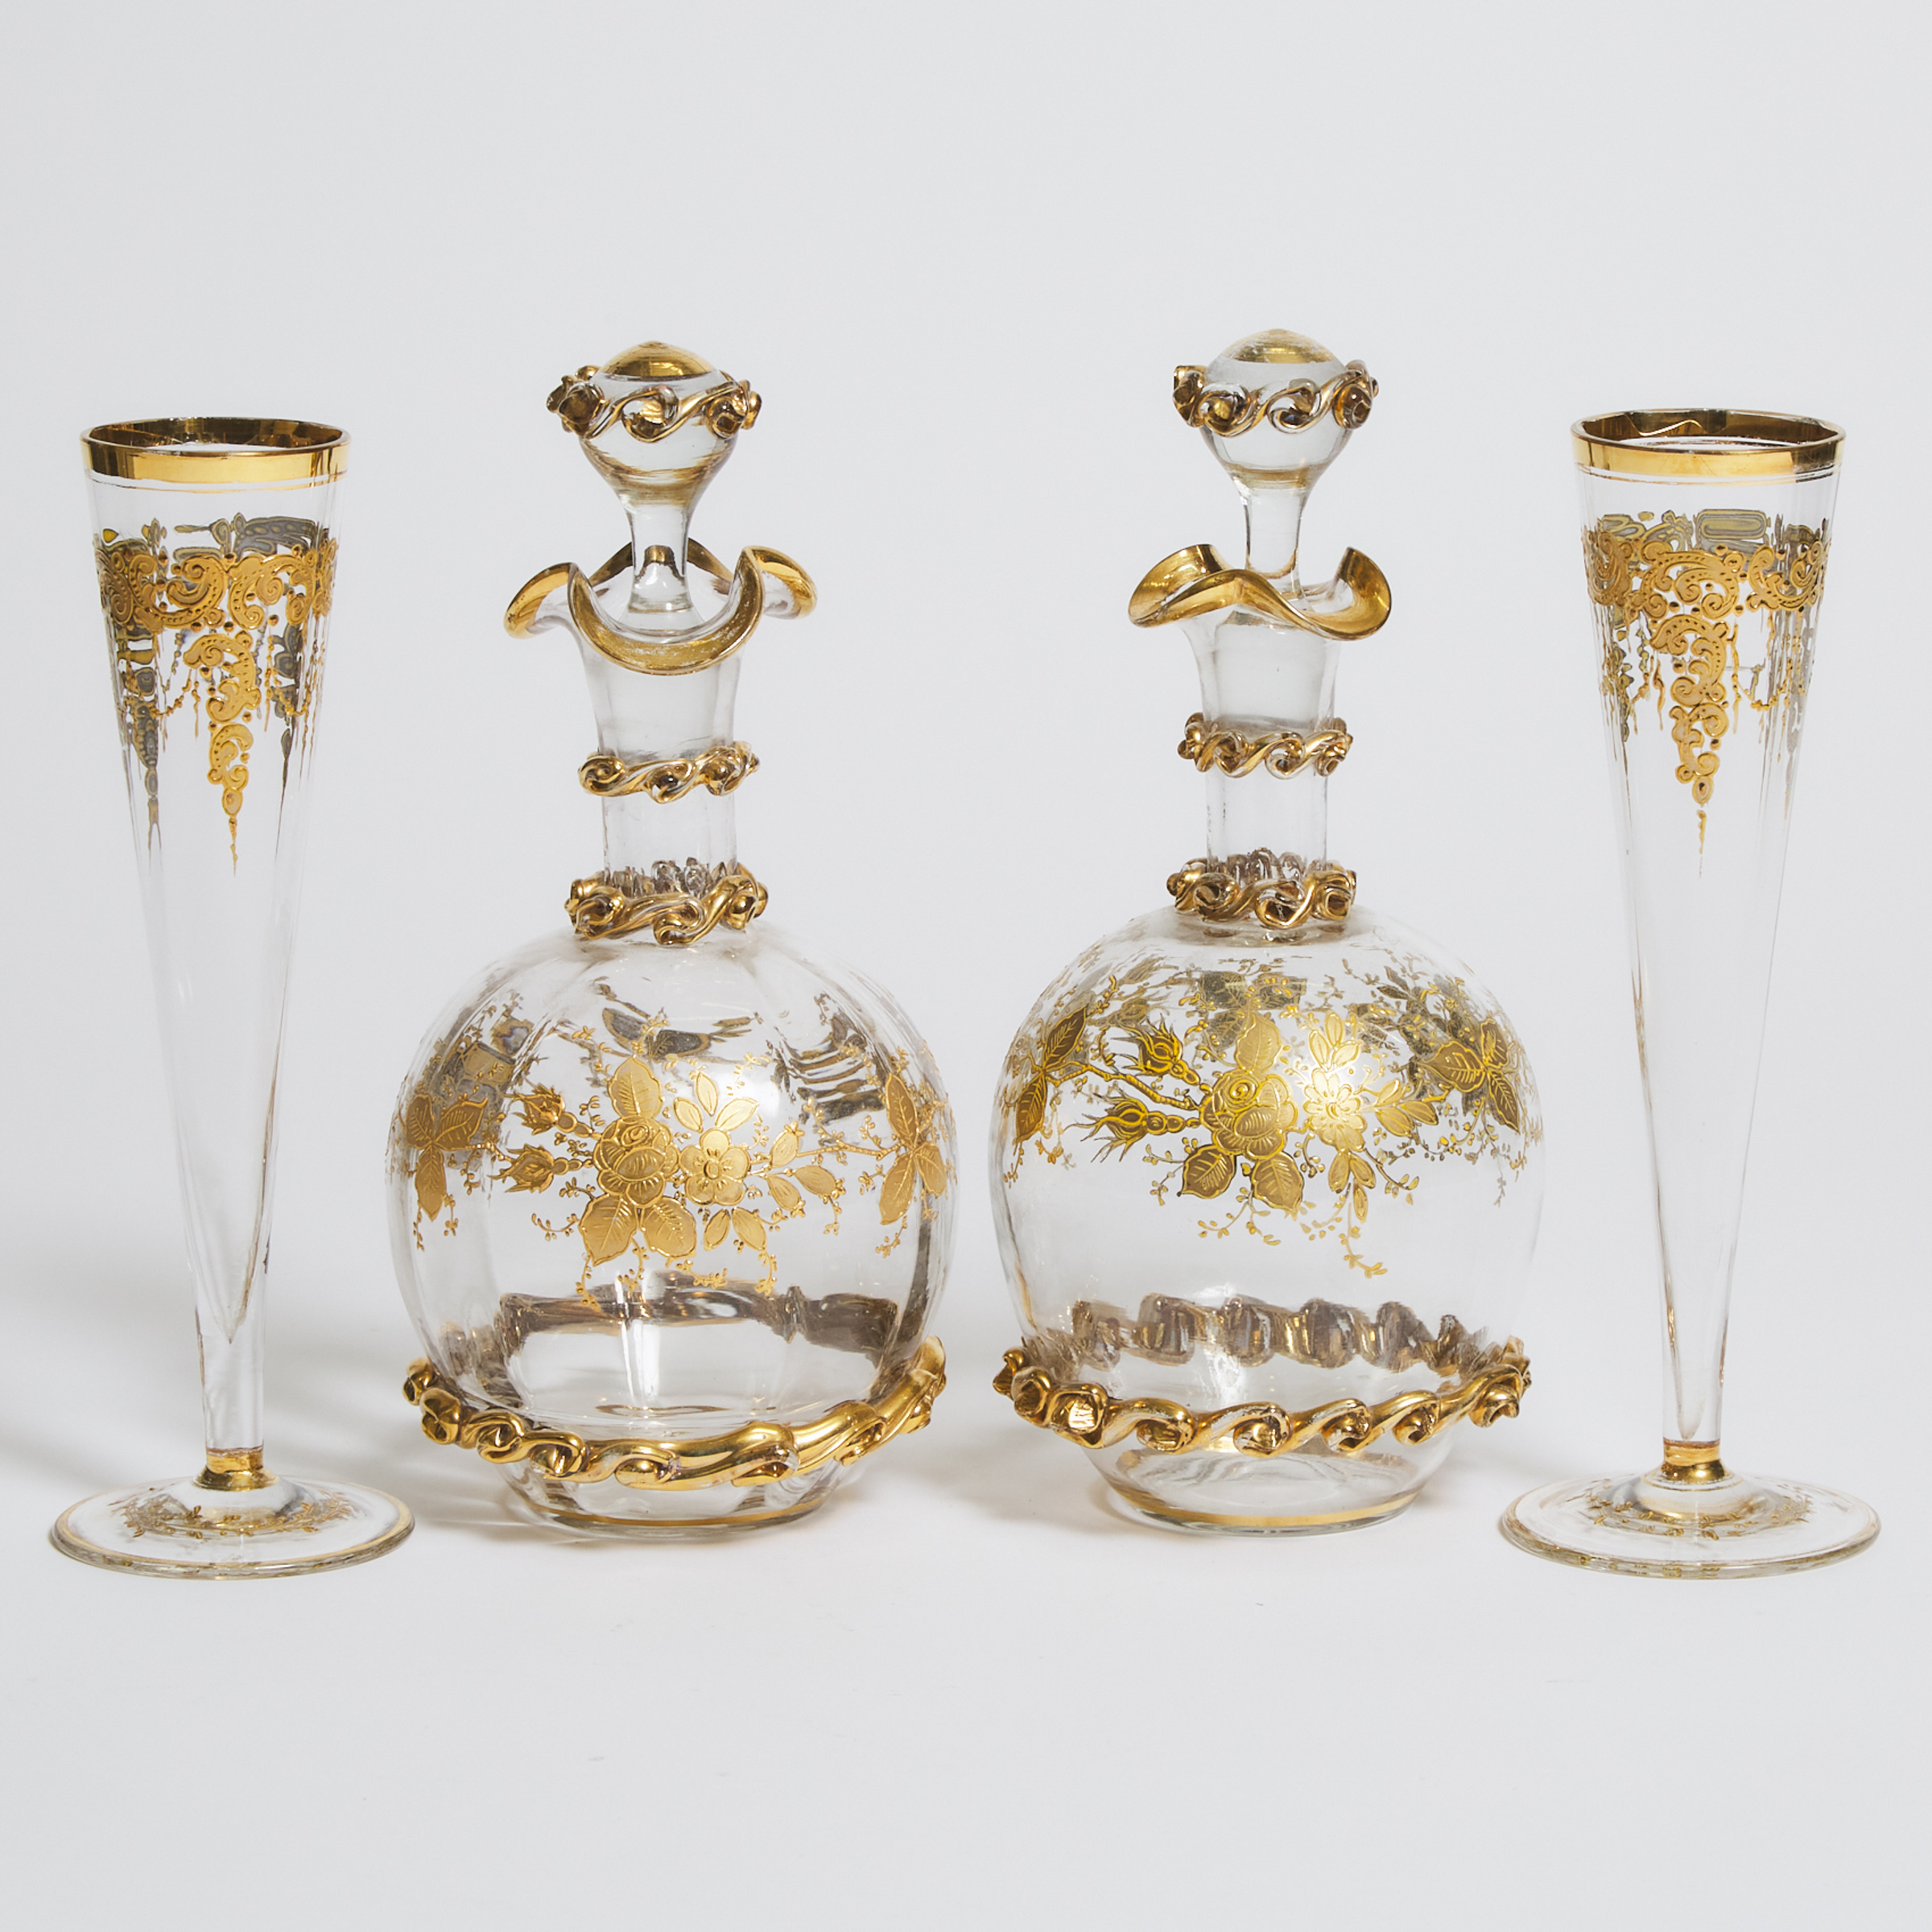 Pair of Continental Gilt Glass